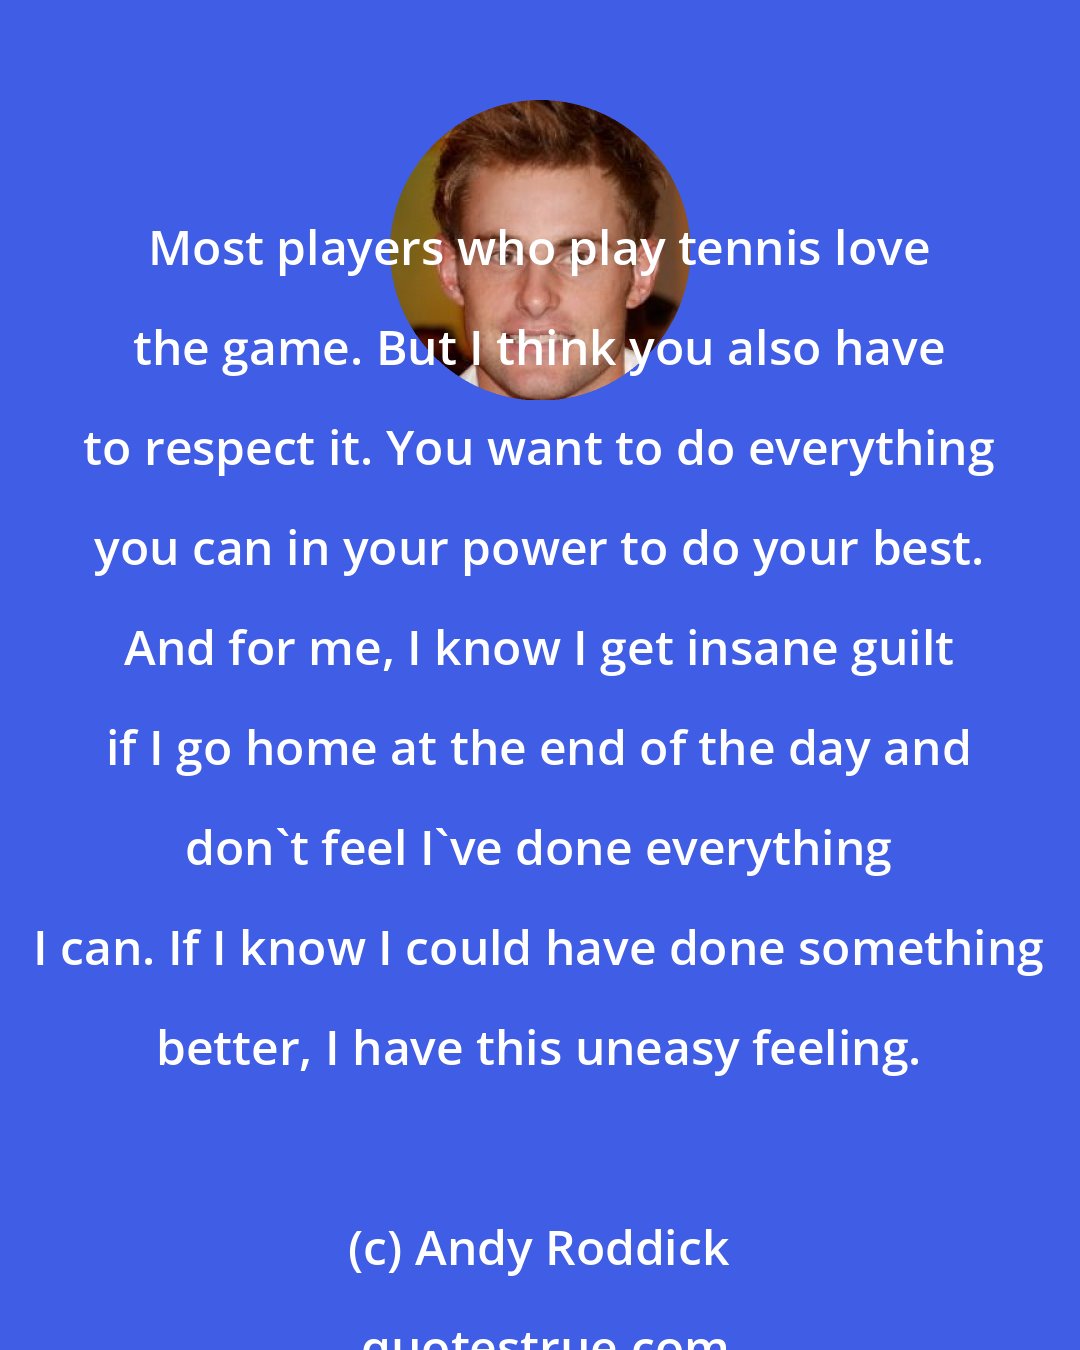 Andy Roddick: Most players who play tennis love the game. But I think you also have to respect it. You want to do everything you can in your power to do your best. And for me, I know I get insane guilt if I go home at the end of the day and don't feel I've done everything I can. If I know I could have done something better, I have this uneasy feeling.